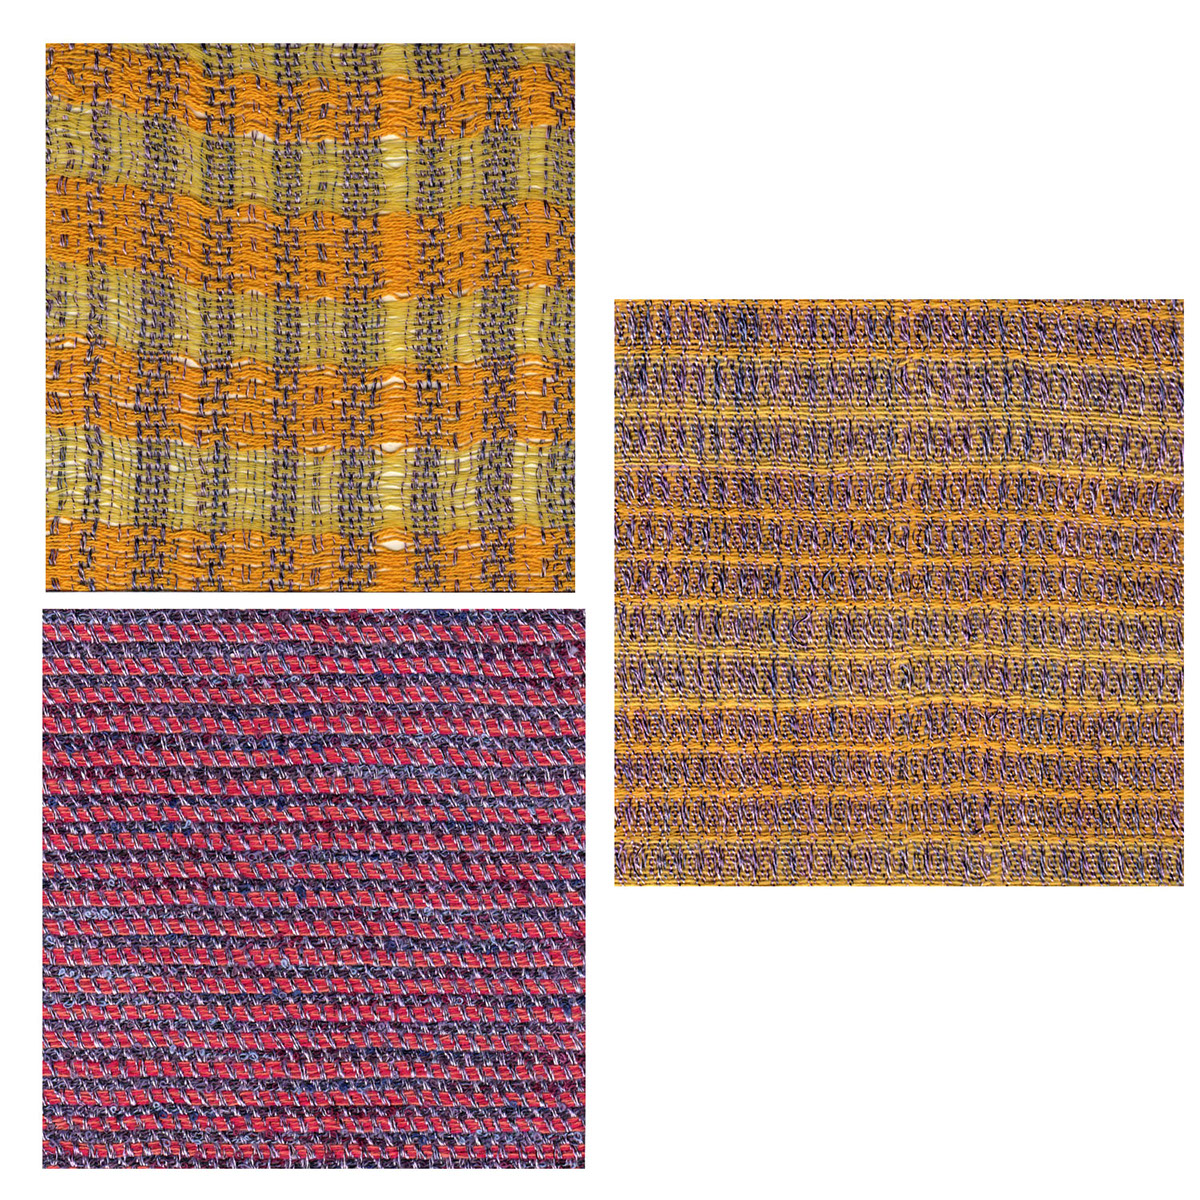 Woven Hand Loom textile